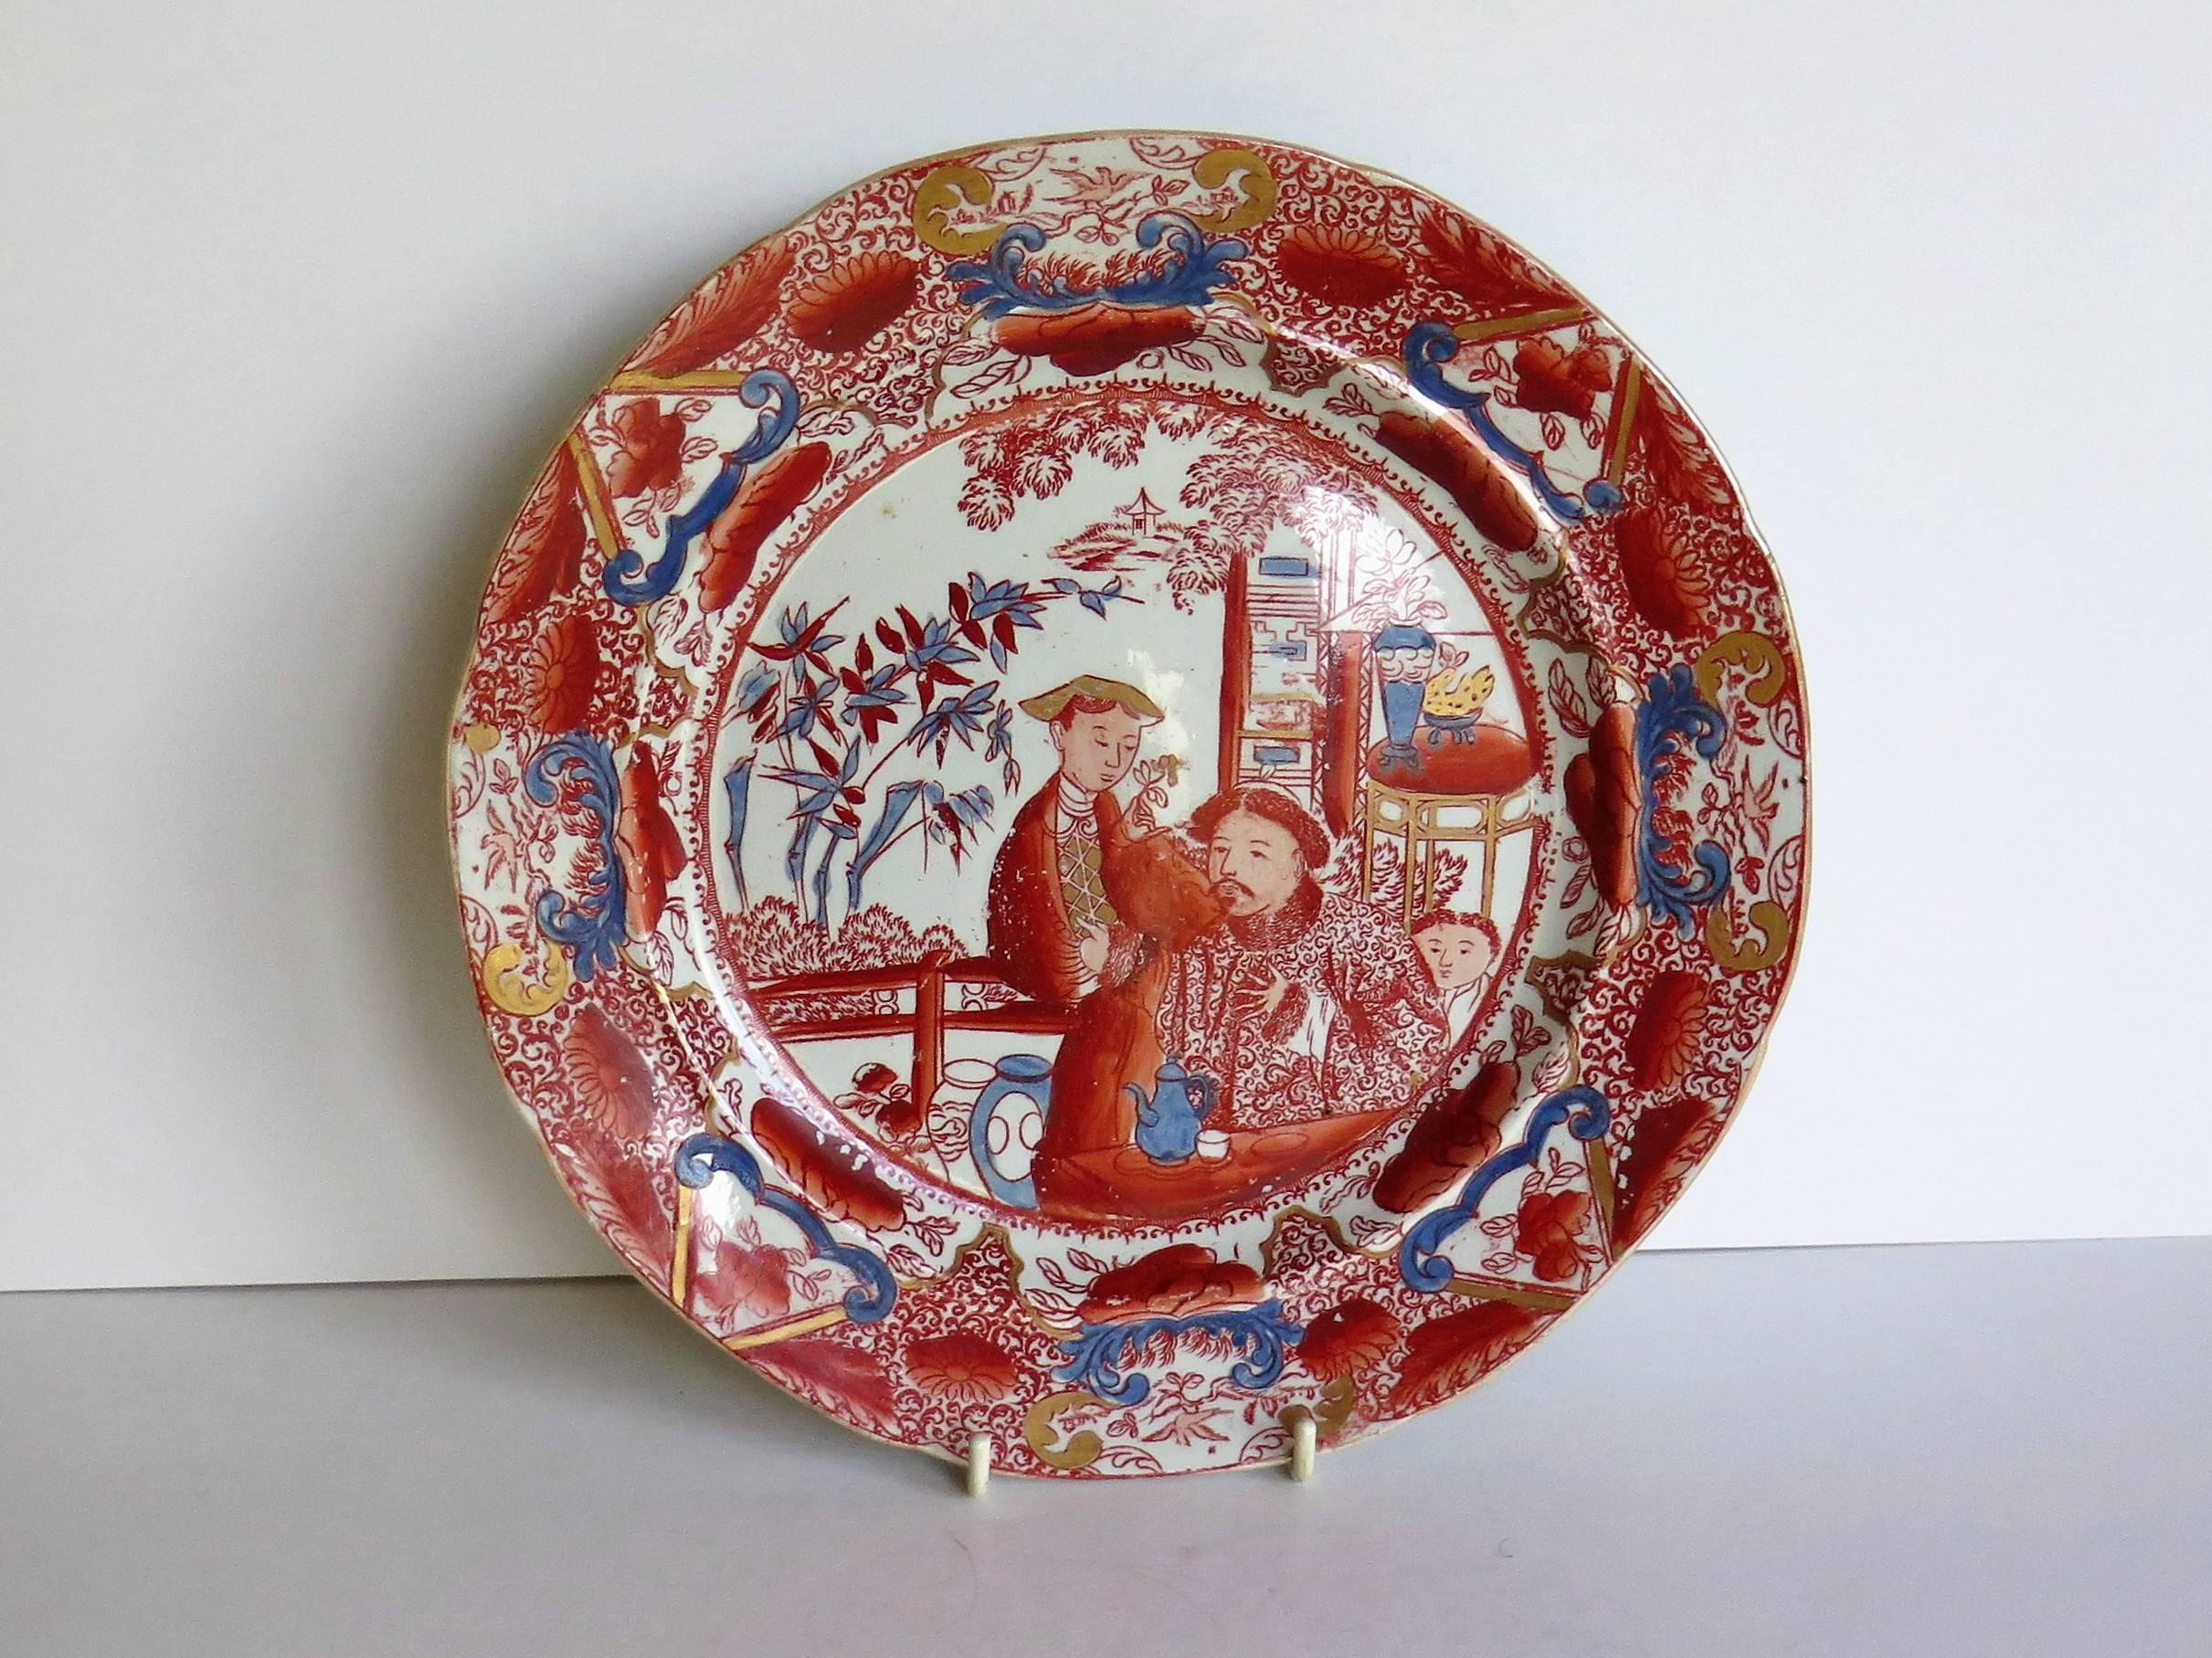 This Ironstone pottery dinner plate was made by the Mason's factory at Lane Delph, Staffordshire, England and is decorated in the Mandarin Pattern with the distinctive red colorway which is very rare.

The design is one of Mason's chinoiserie